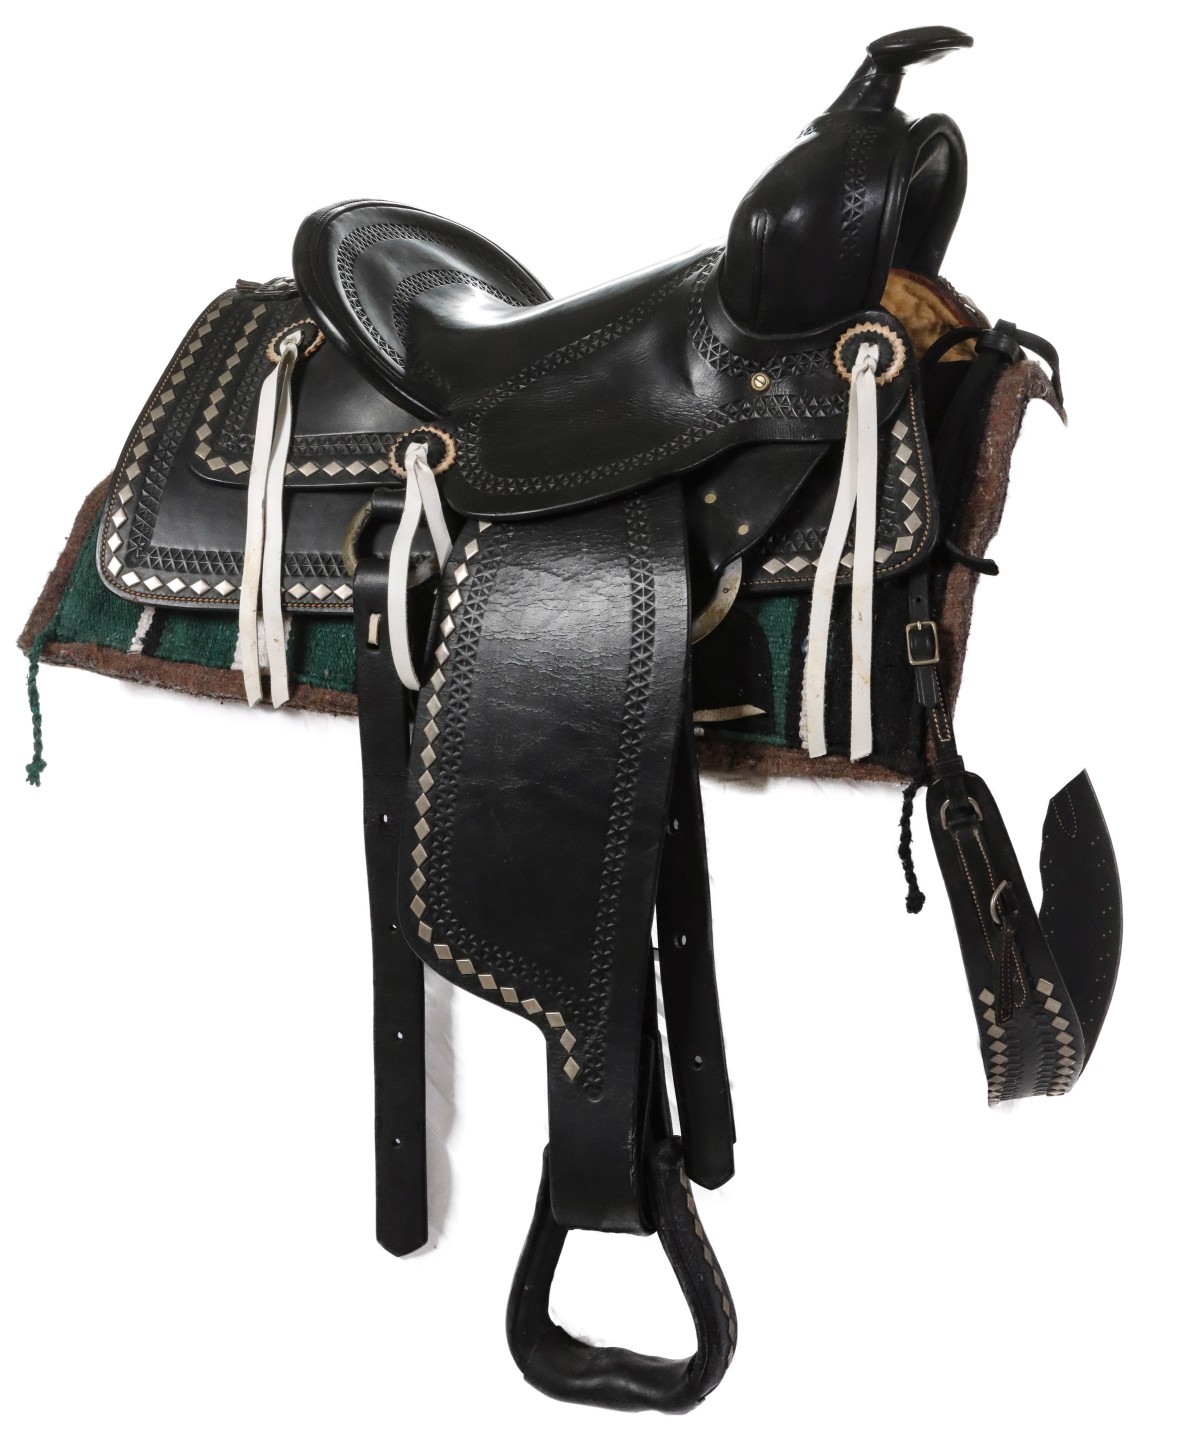 UNUSED 1950s TWO-COLOR SADDLE & BREASTPLATE WITH SILVER